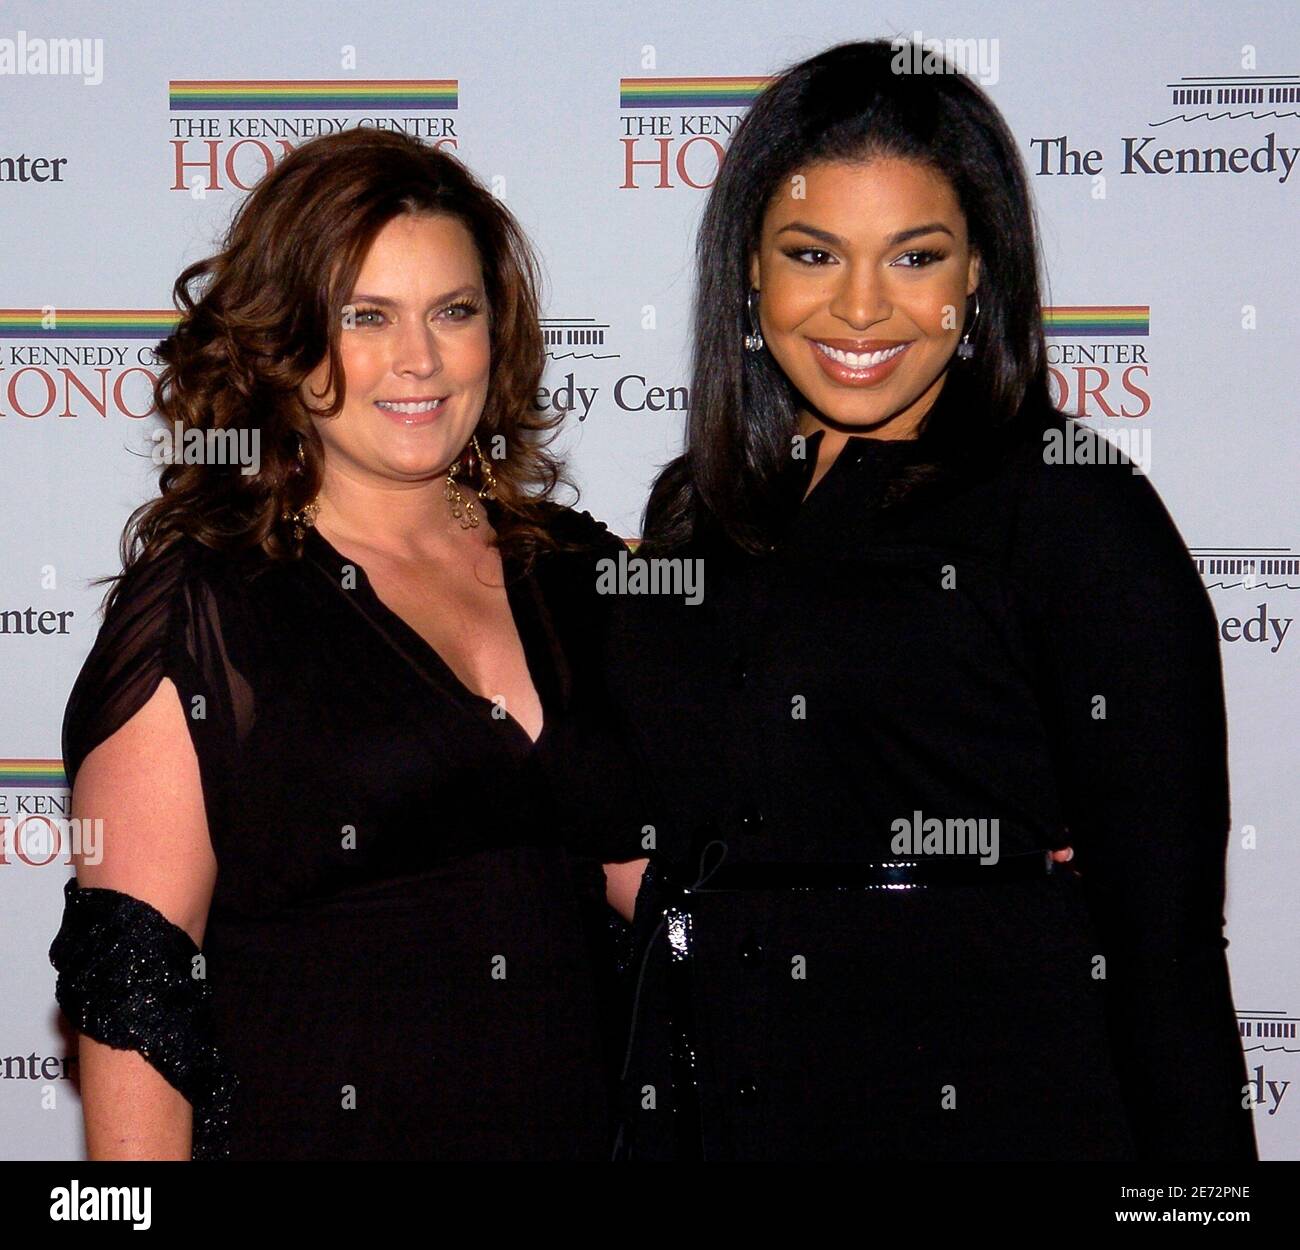 American Idol winning singer Jordin Sparks (R) and mother Jodi arrive at the 2007 Kennedy Center Honoree Gala Dinner at the State Department in Washington December 1, 2007.  The annual awards honor lifetime achievement in the performing arts.     REUTERS/Mike Theiler (United States) Stock Photo